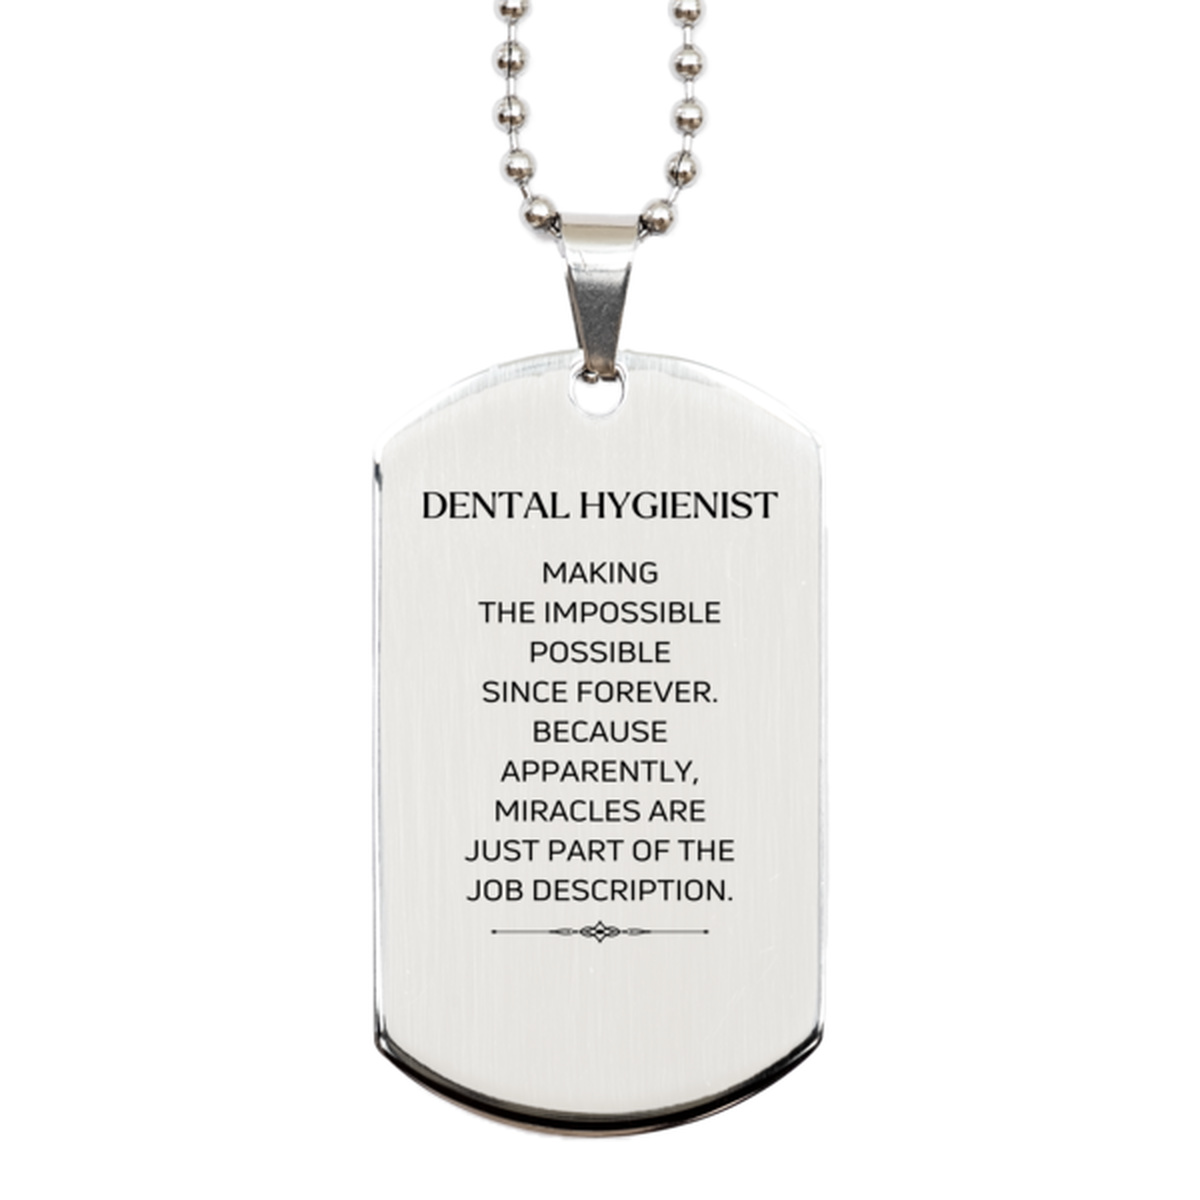 Funny Dental Hygienist Gifts, Miracles are just part of the job description, Inspirational Birthday Silver Dog Tag For Dental Hygienist, Men, Women, Coworkers, Friends, Boss